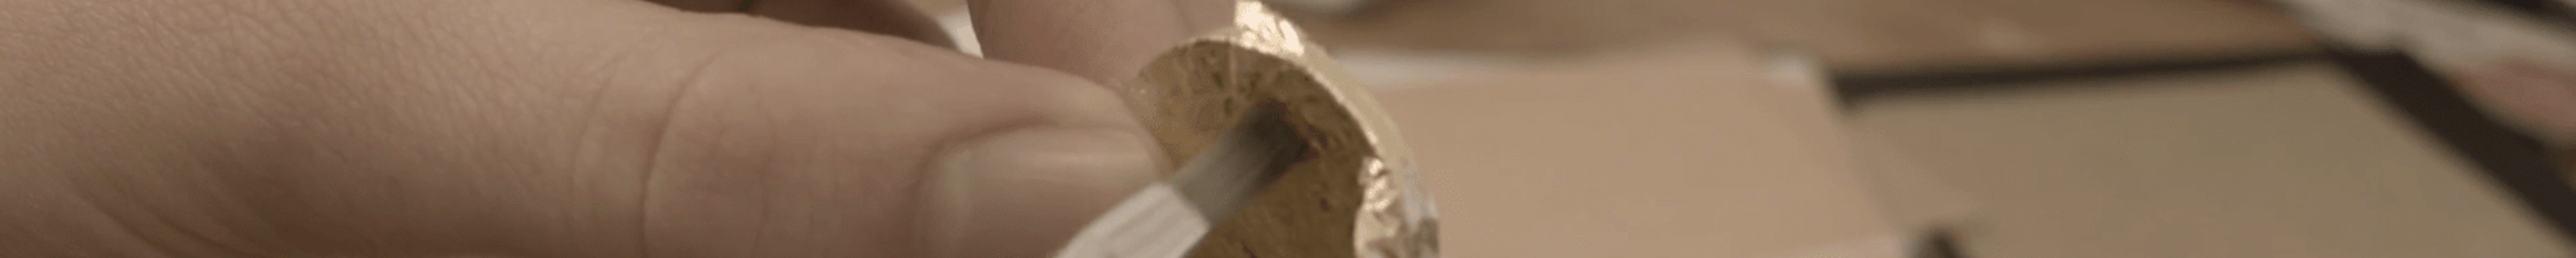 Gold leaf is being pushed lightly by a paintbrush onto a coin shape making counterfeit gold coin